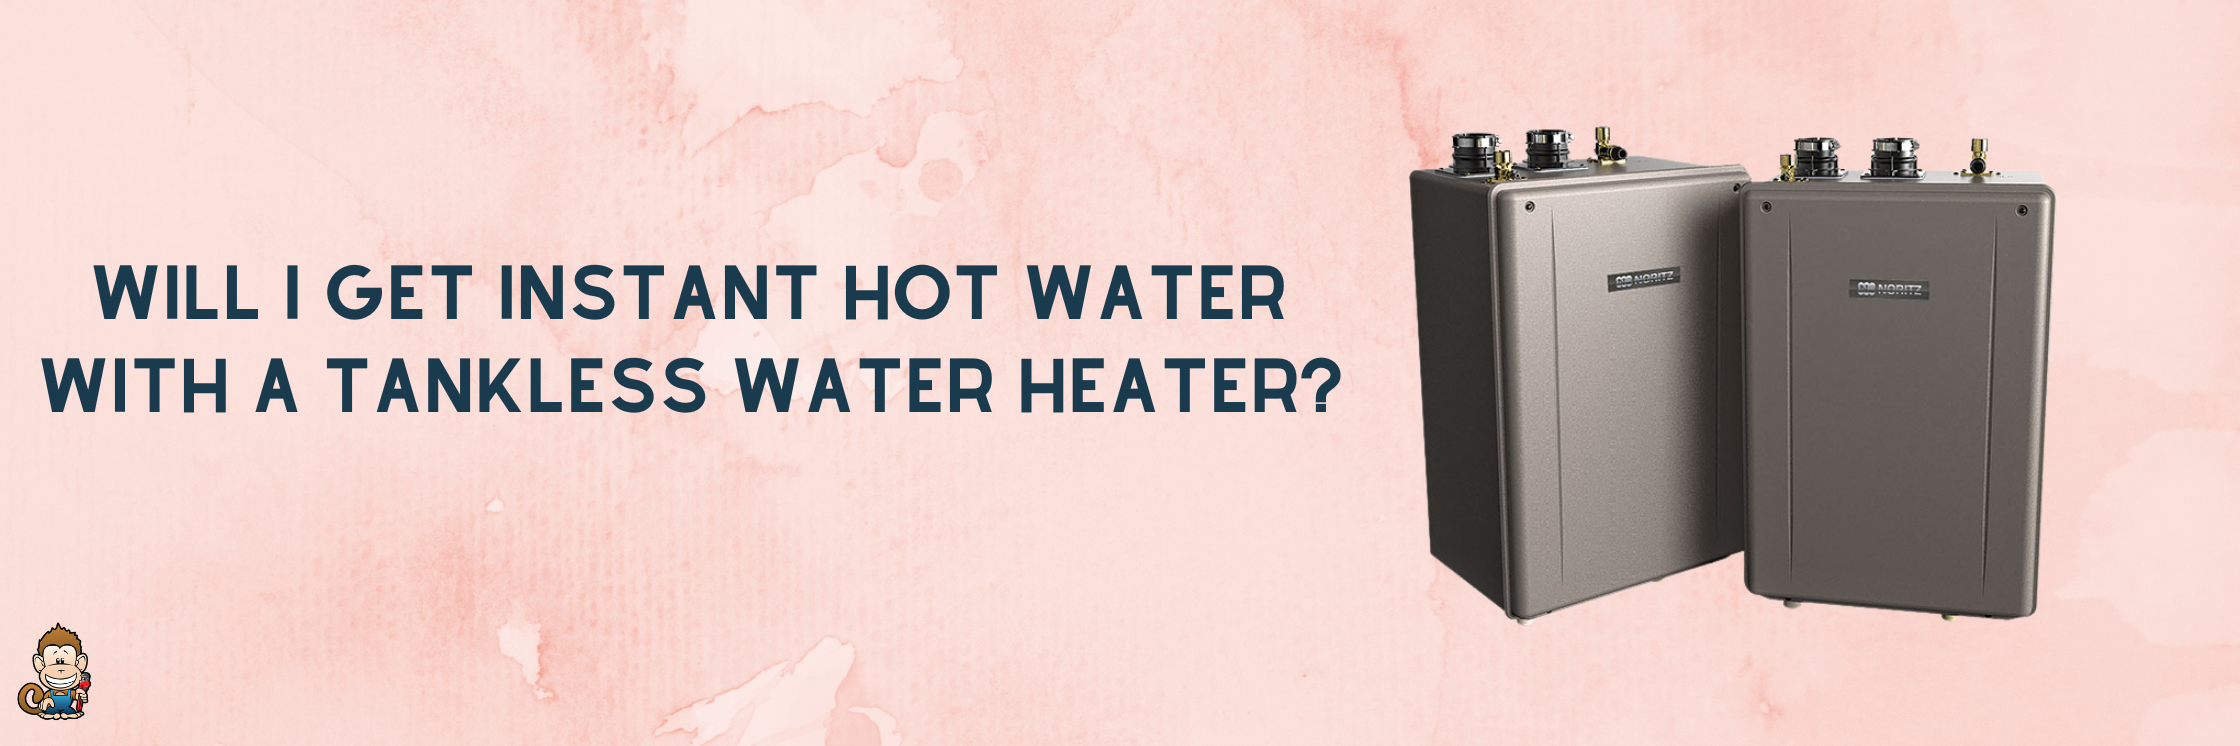 Will I Get Instant Hot Water with a Tankless Water Heater?